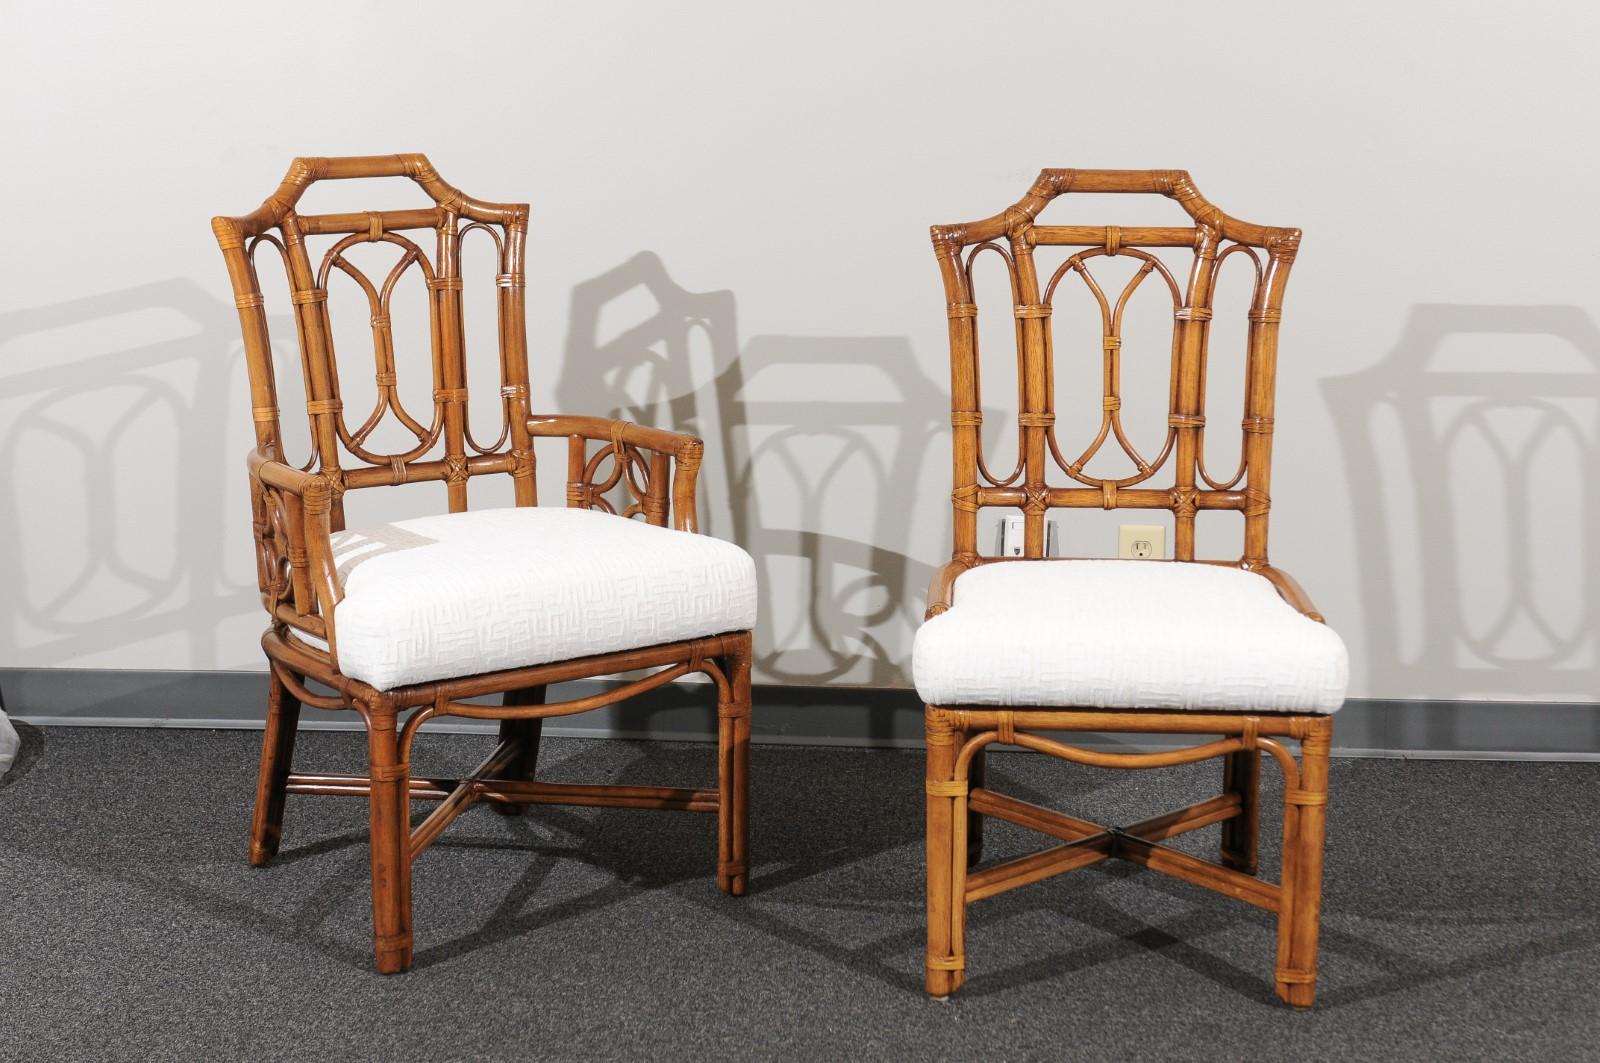 A radiant restored set of ten (10) dining chairs from a difficult to find series by Ficks Reed, circa 1980. There are two (2) host arm chairs and eight (8) side chairs. Stunning high back form with a fabulous Pagoda detail at the crest of the back.